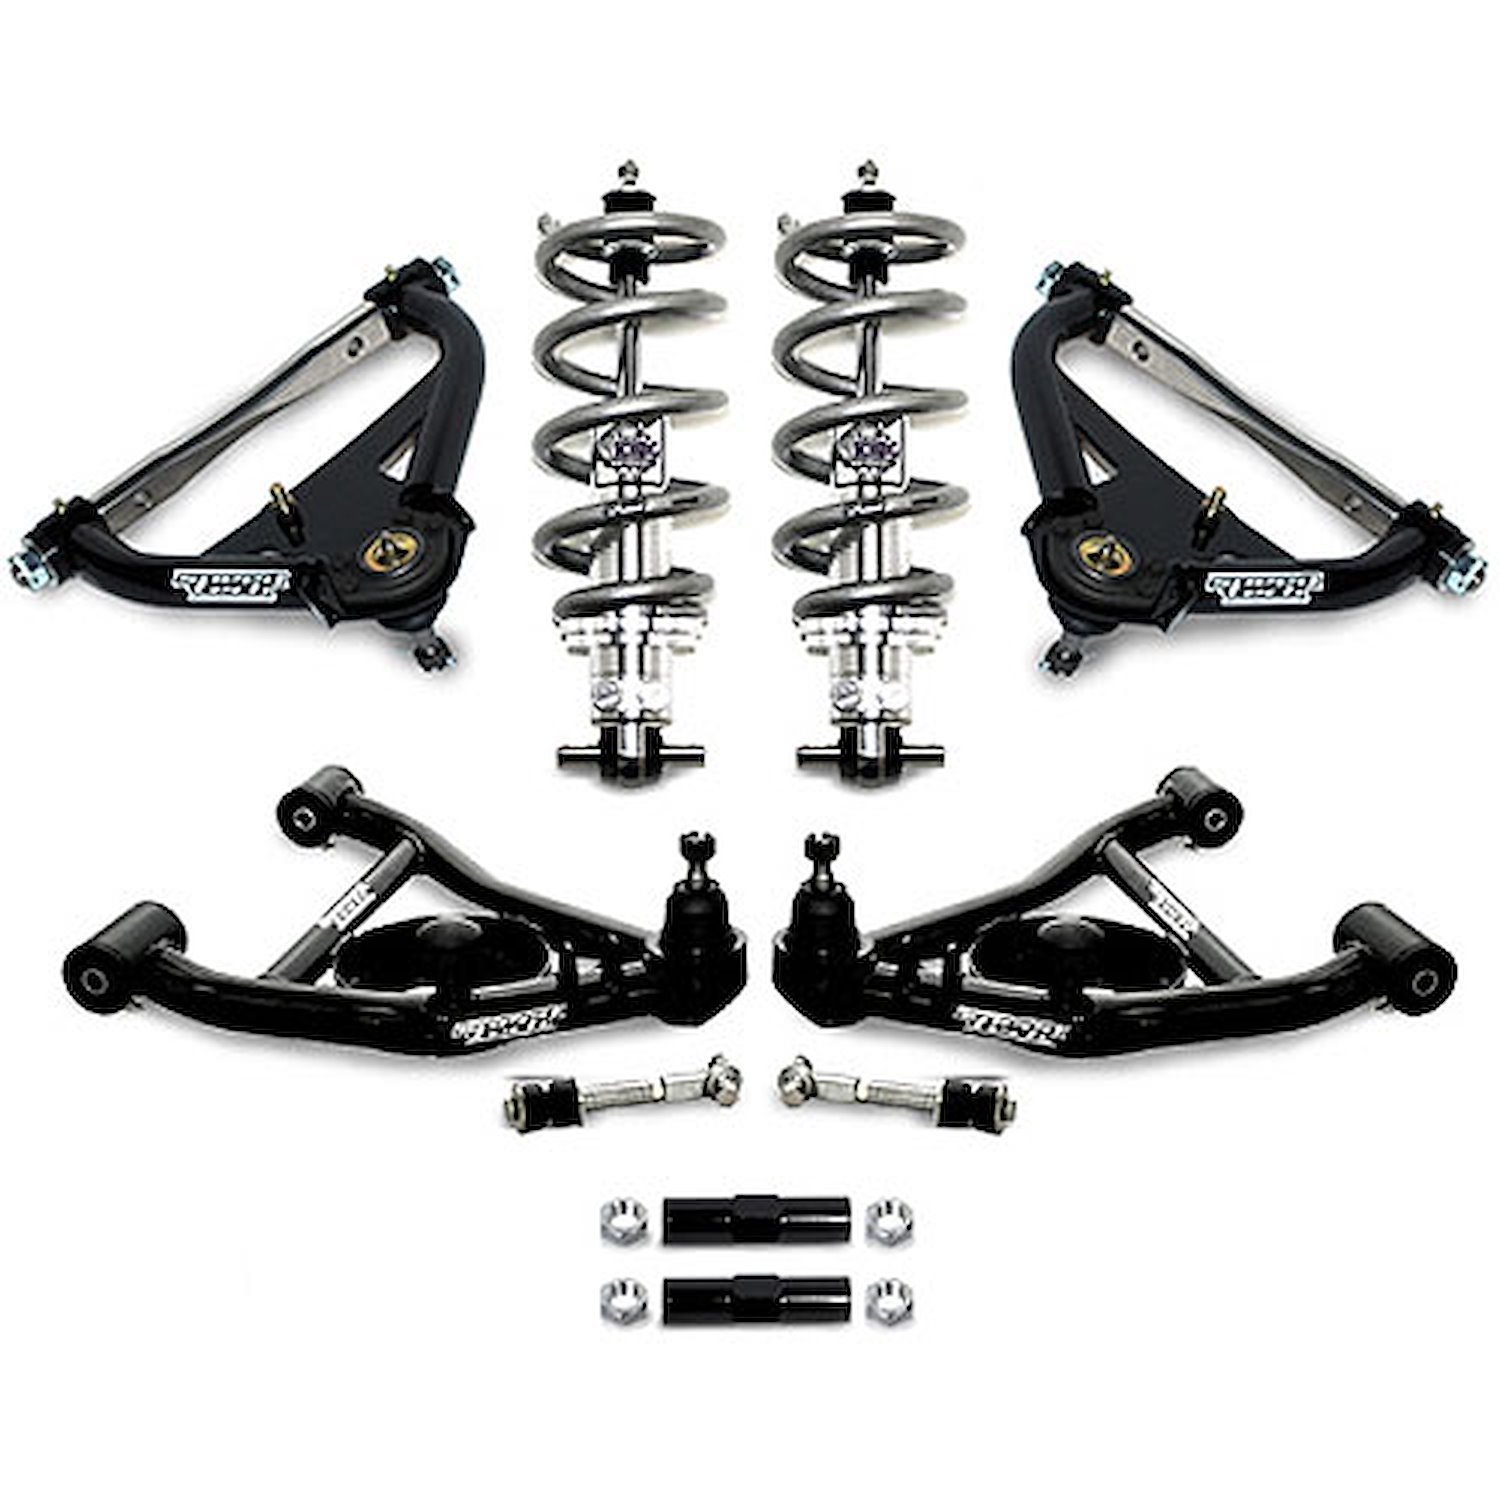 Pro Touring Front Suspension Package 1978-88 Malibu / Monte Carlo / Cutlass with LS, Small/Big Block Engine